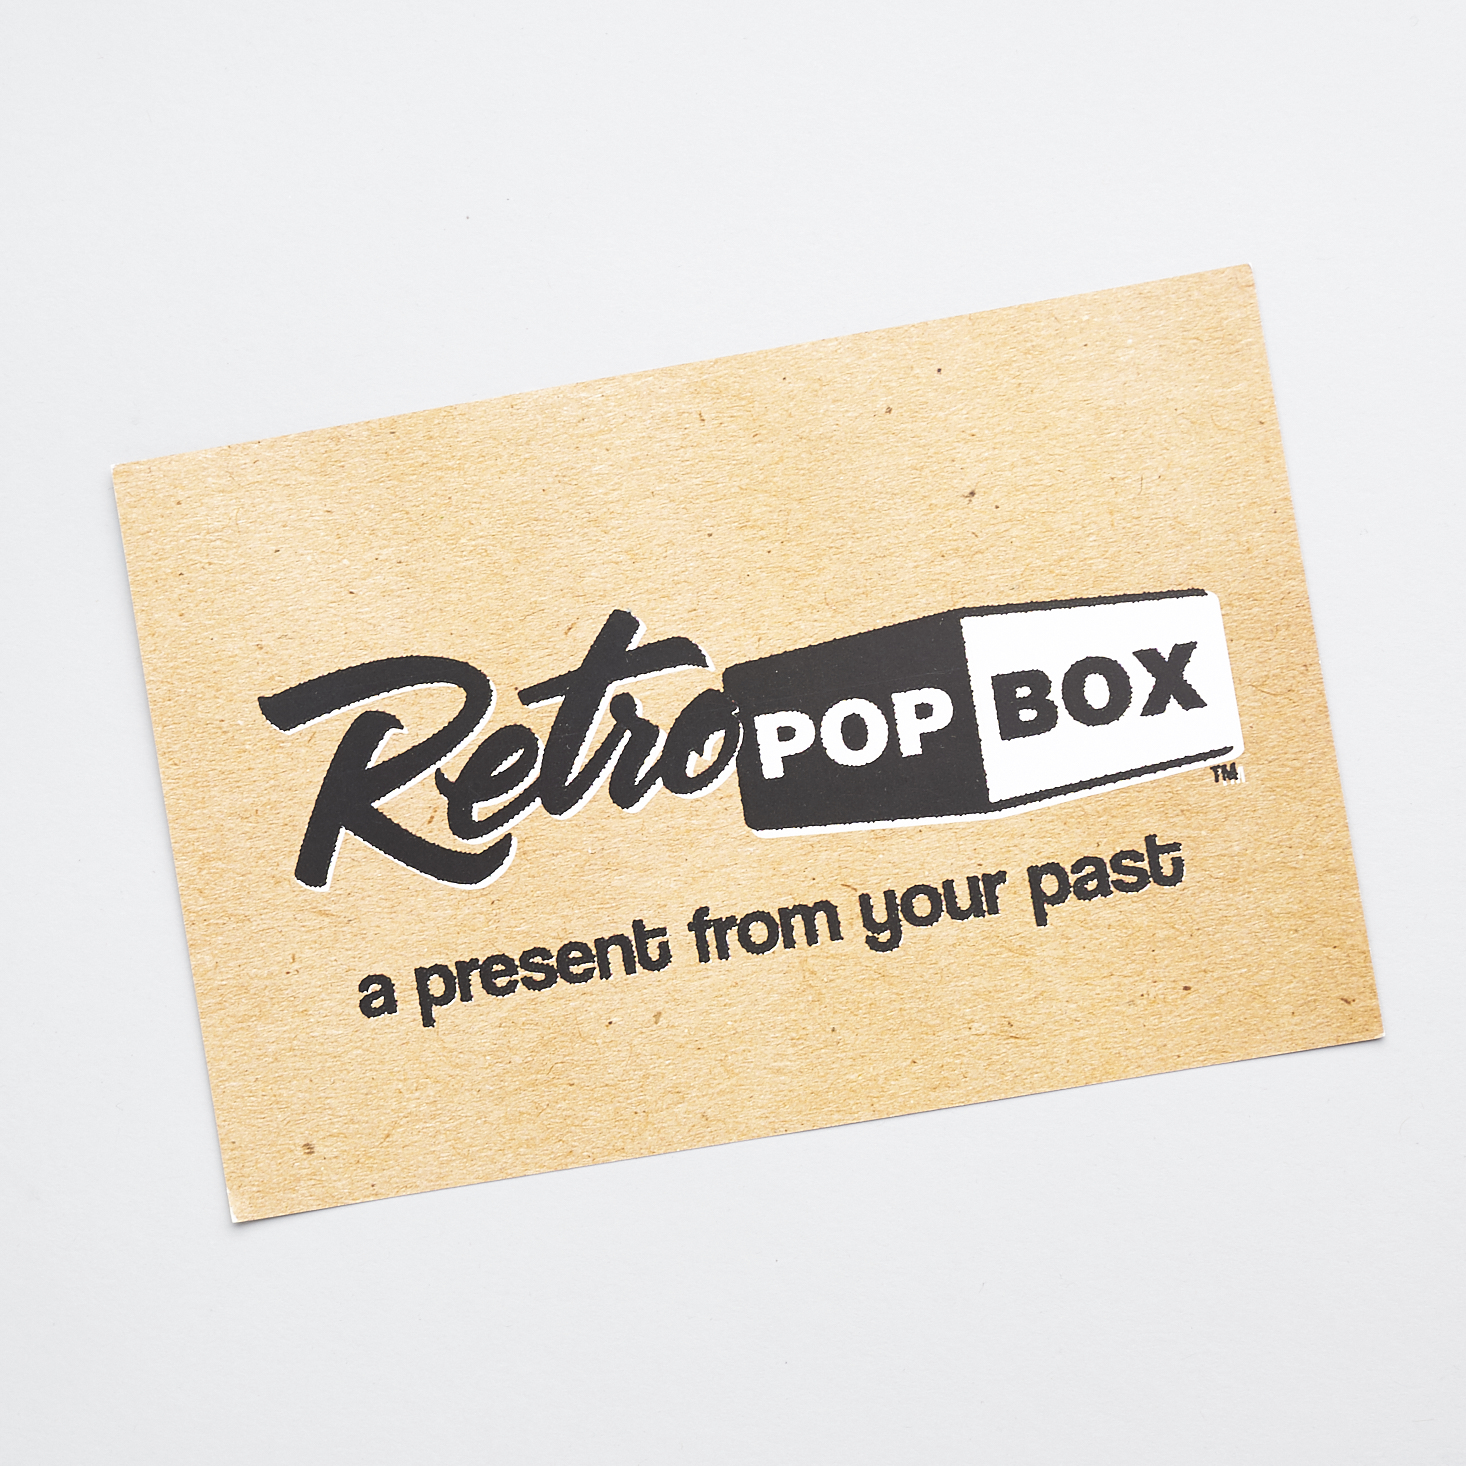 Check out our review of the February 2017 Retro Pop '90s box!